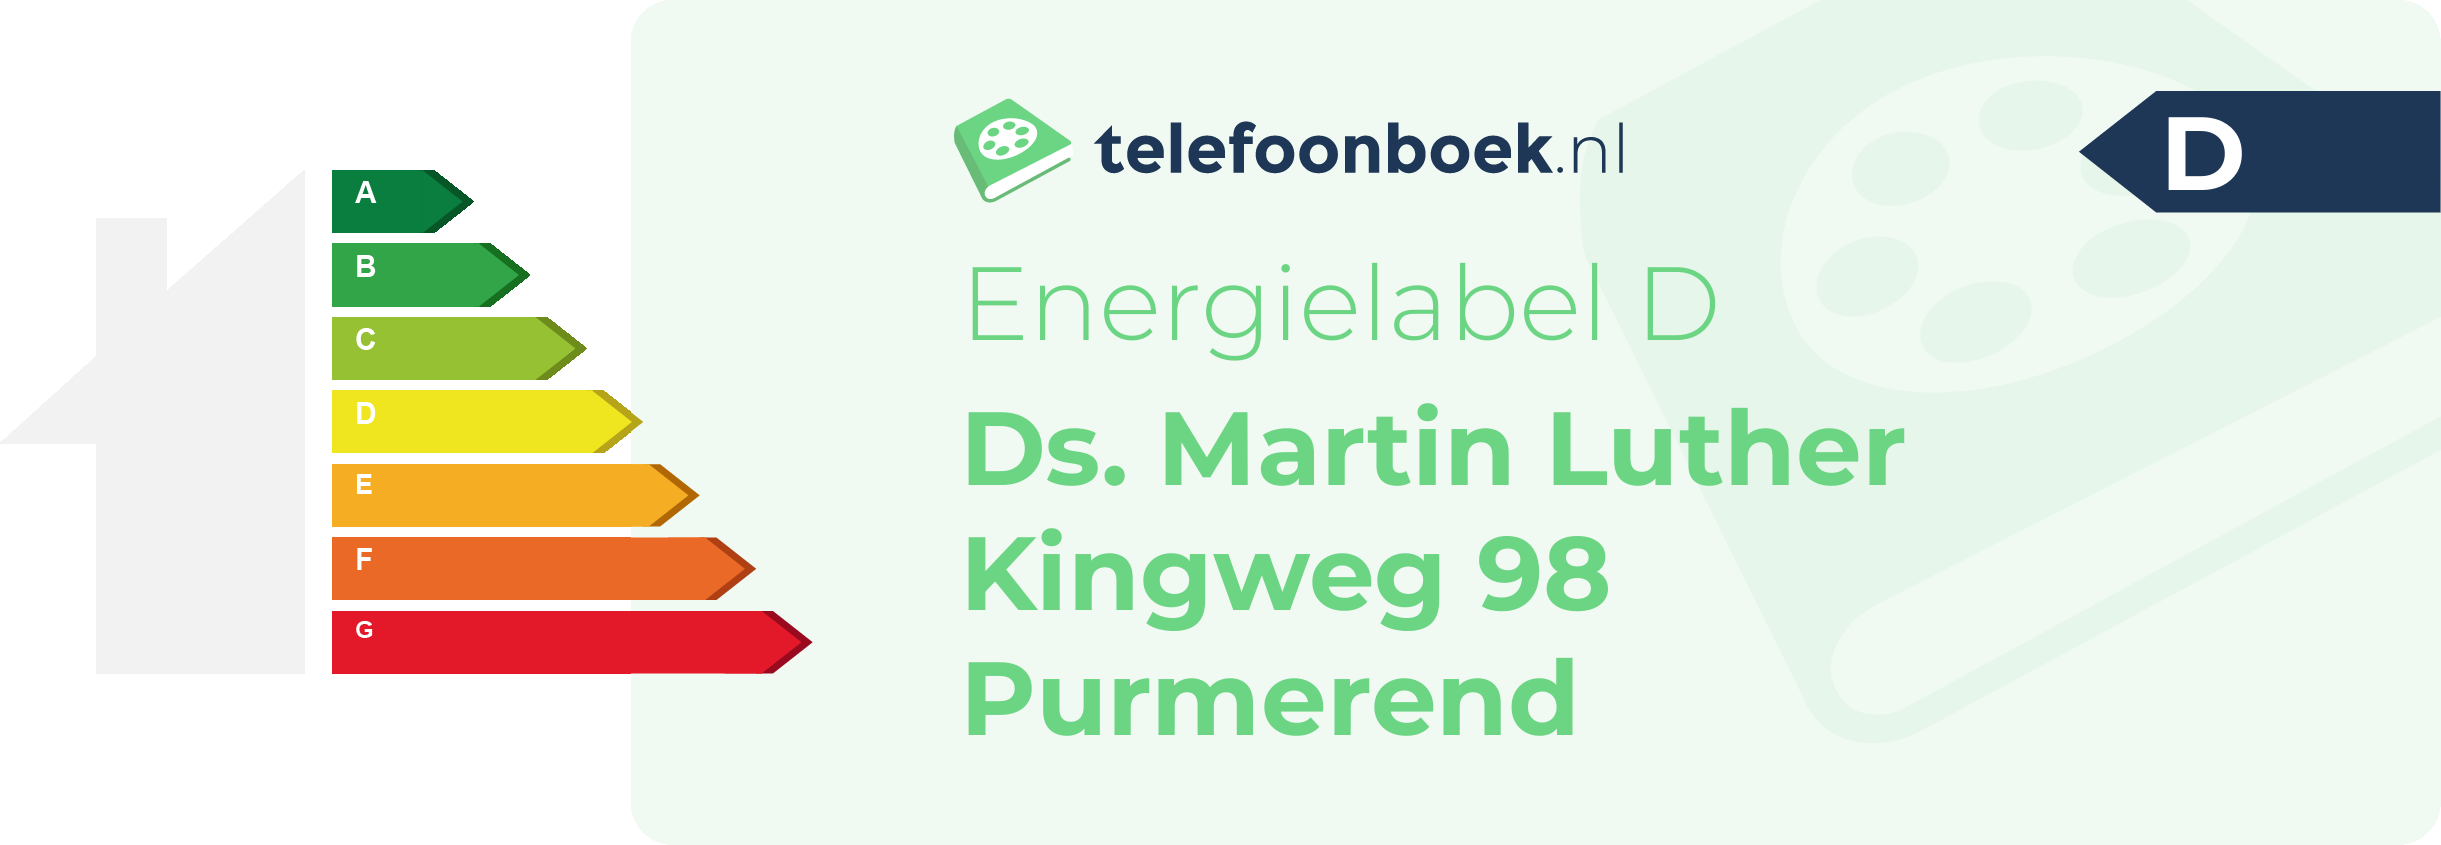 Energielabel Ds. Martin Luther Kingweg 98 Purmerend